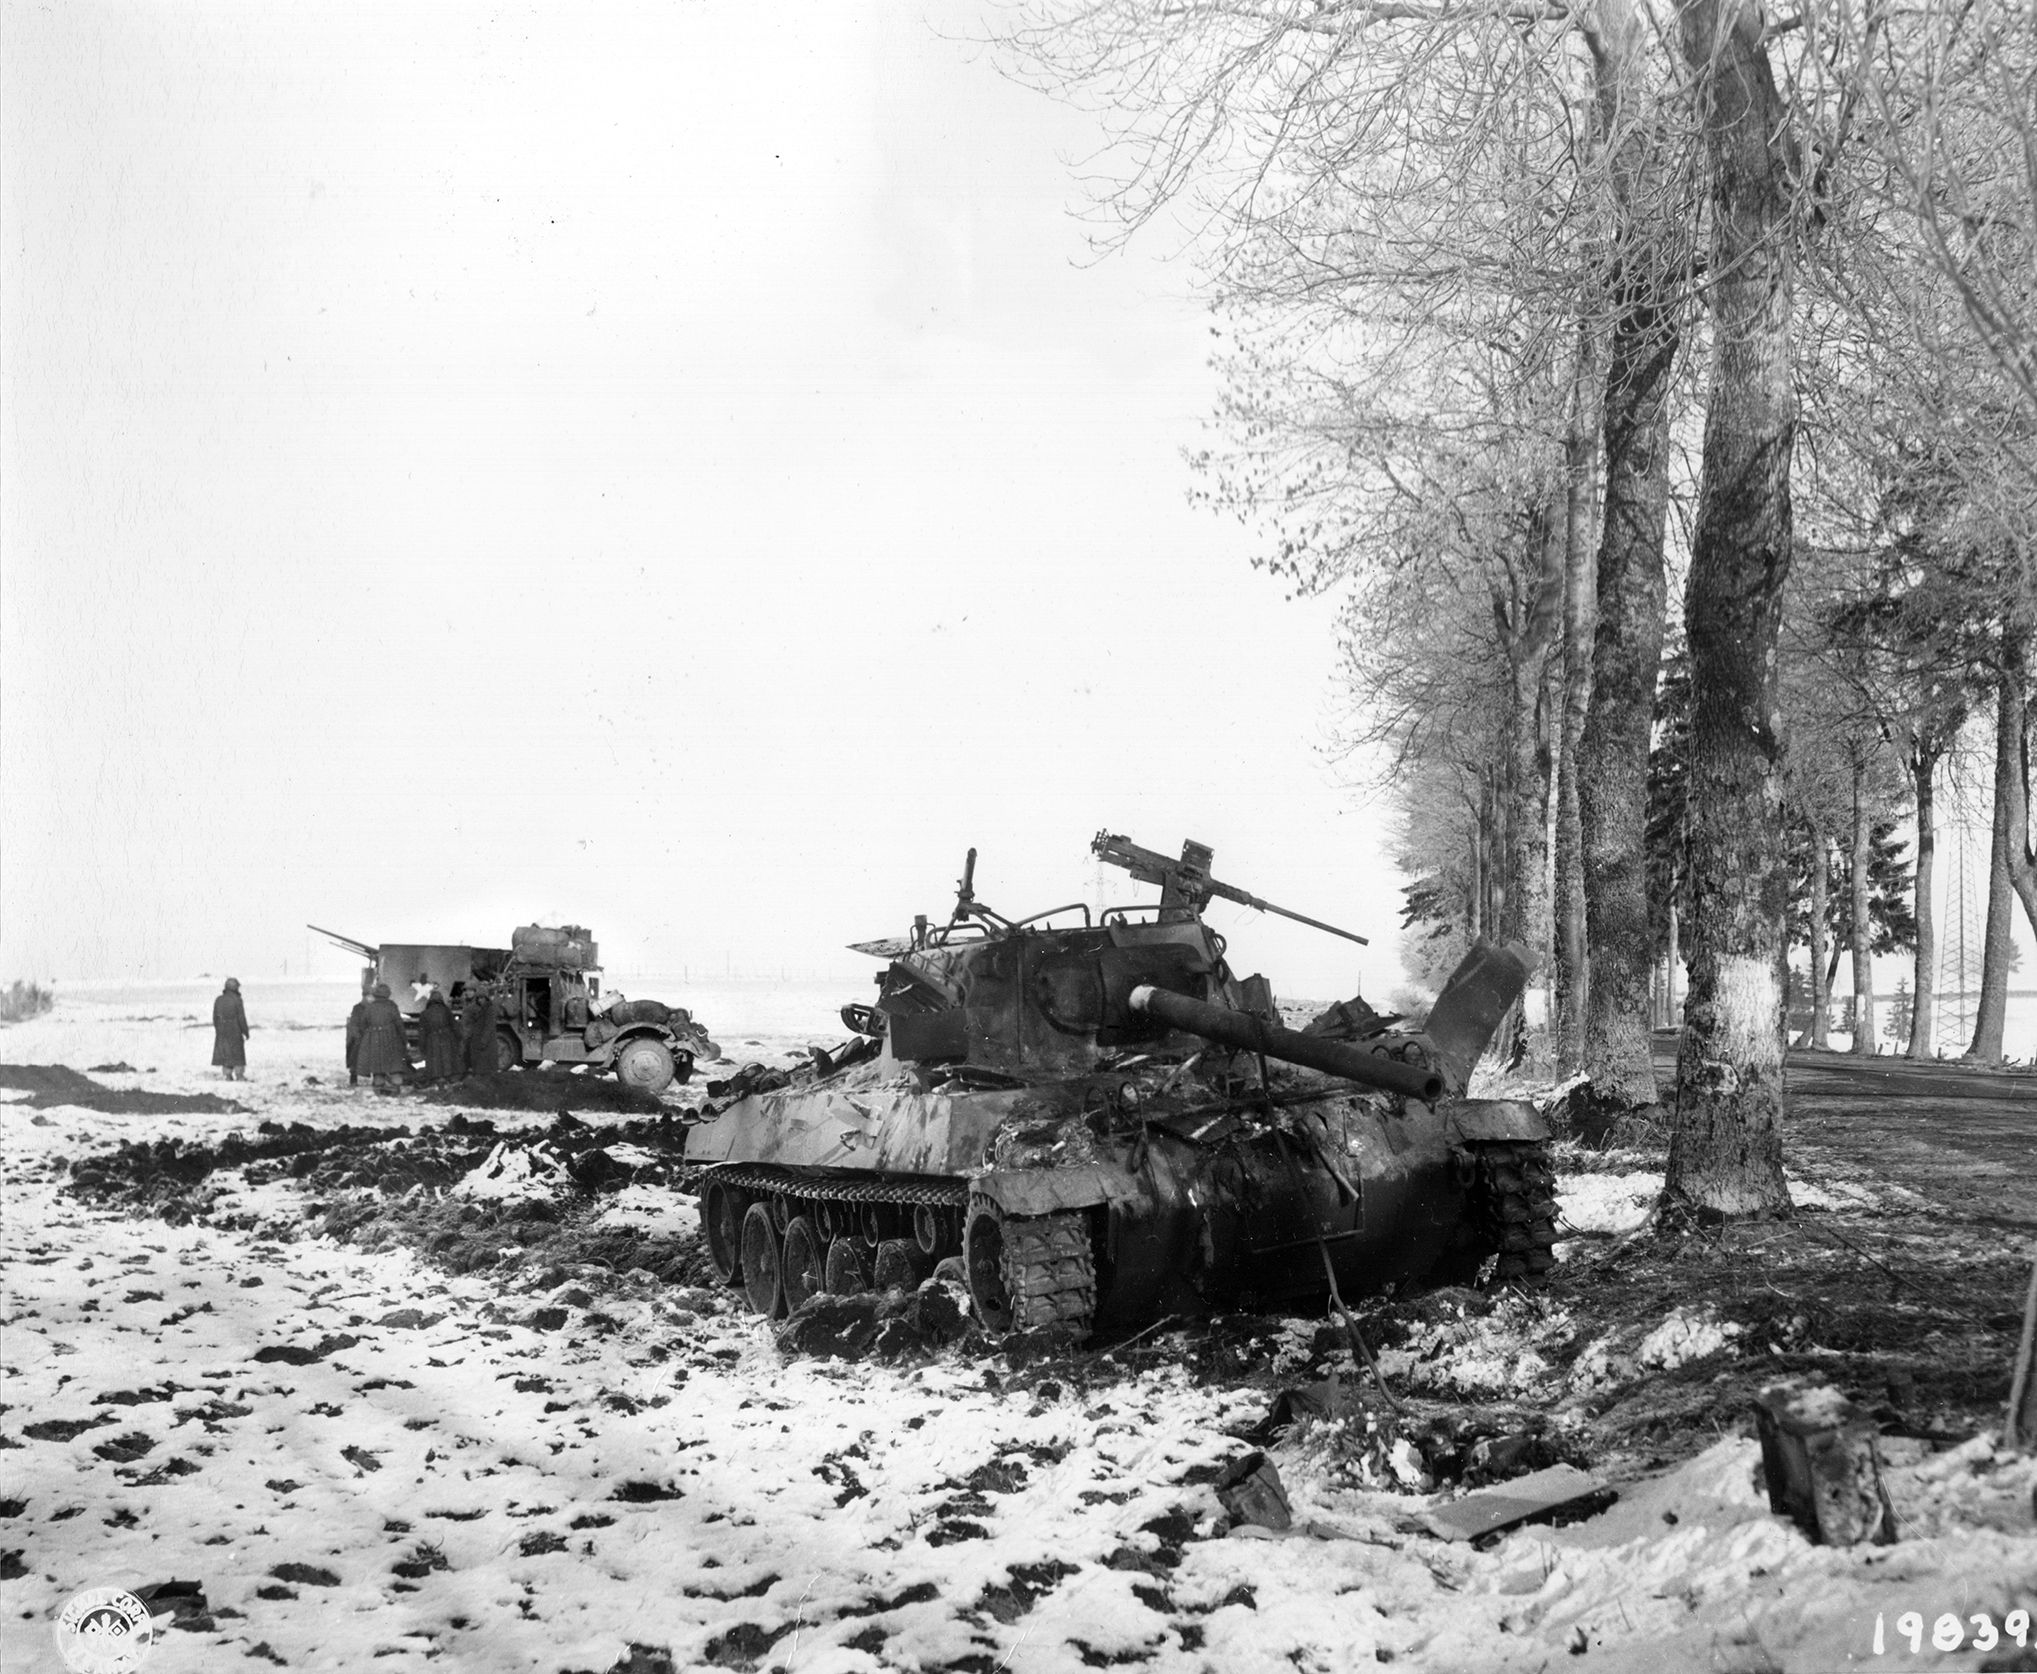 German artillery fire knocked out this M4 Sherman medium tank and another vehicle during the bitter fight for control of Bastogne, a village in Belgium and a vital road nexus. American forces held Bastogne, stifling German plans, until relieved.